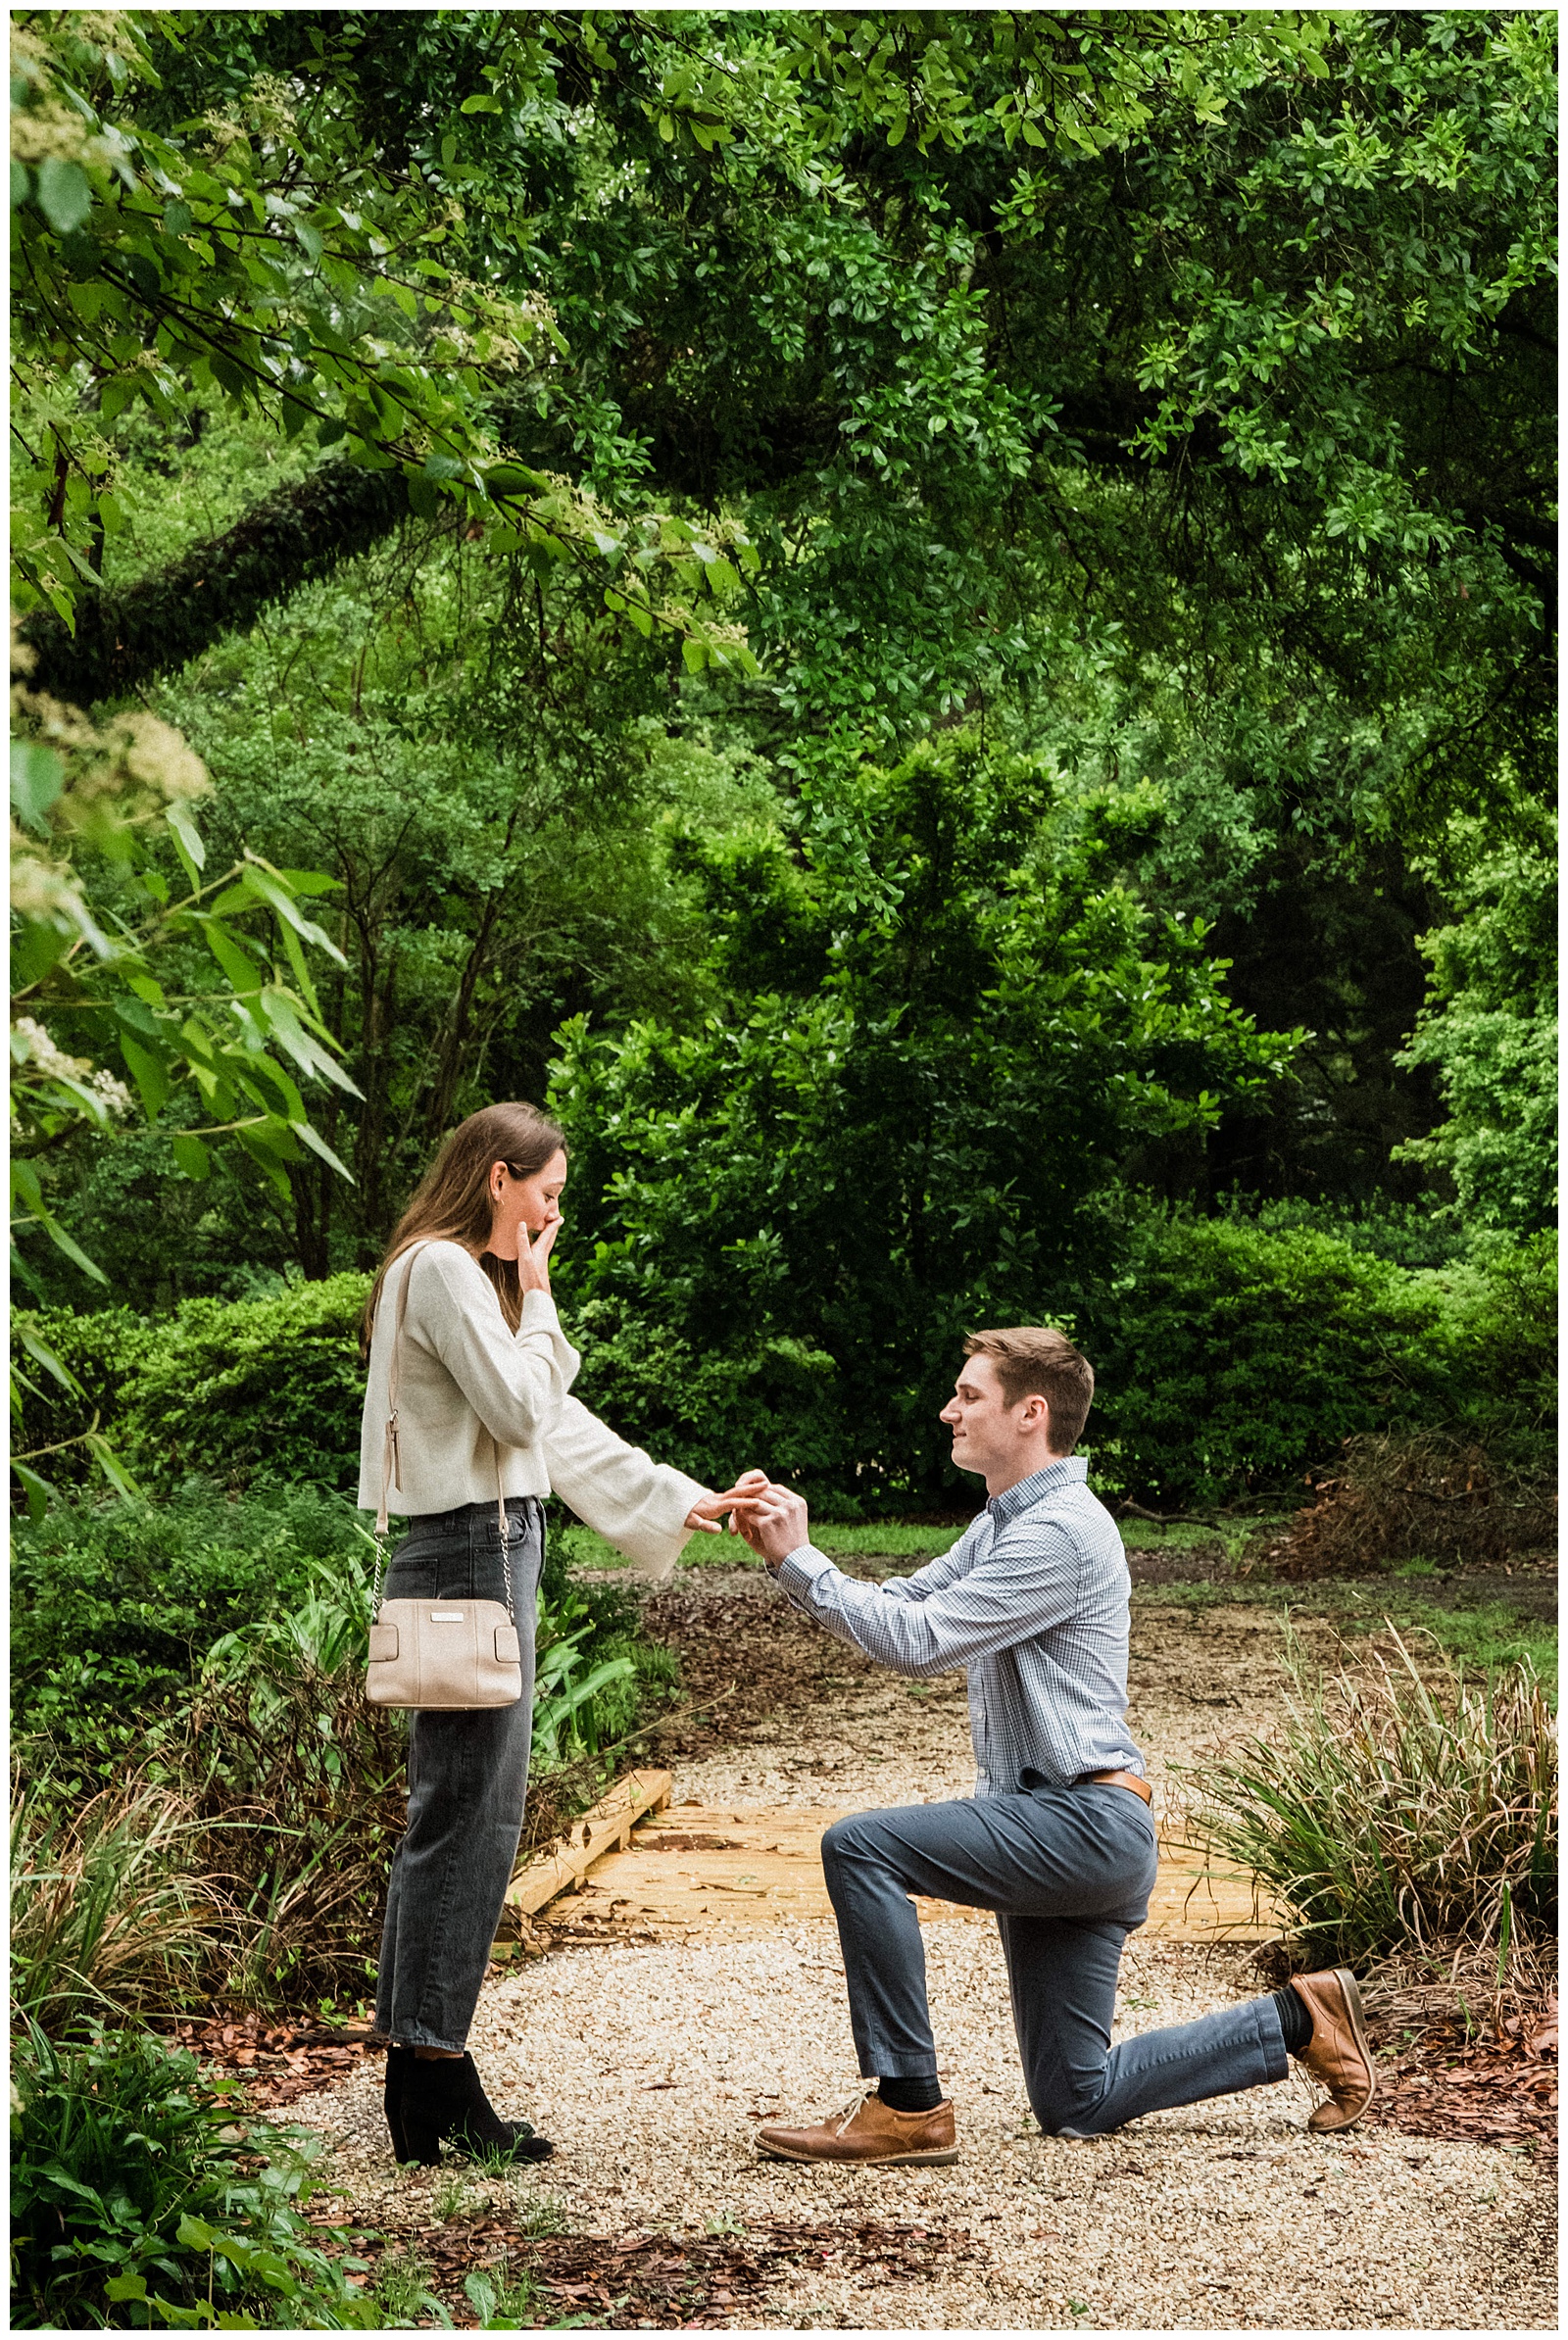 Woman is shocked as boyfriend goes down on one knee to propose at Windrush Gardens in Baton Rouge